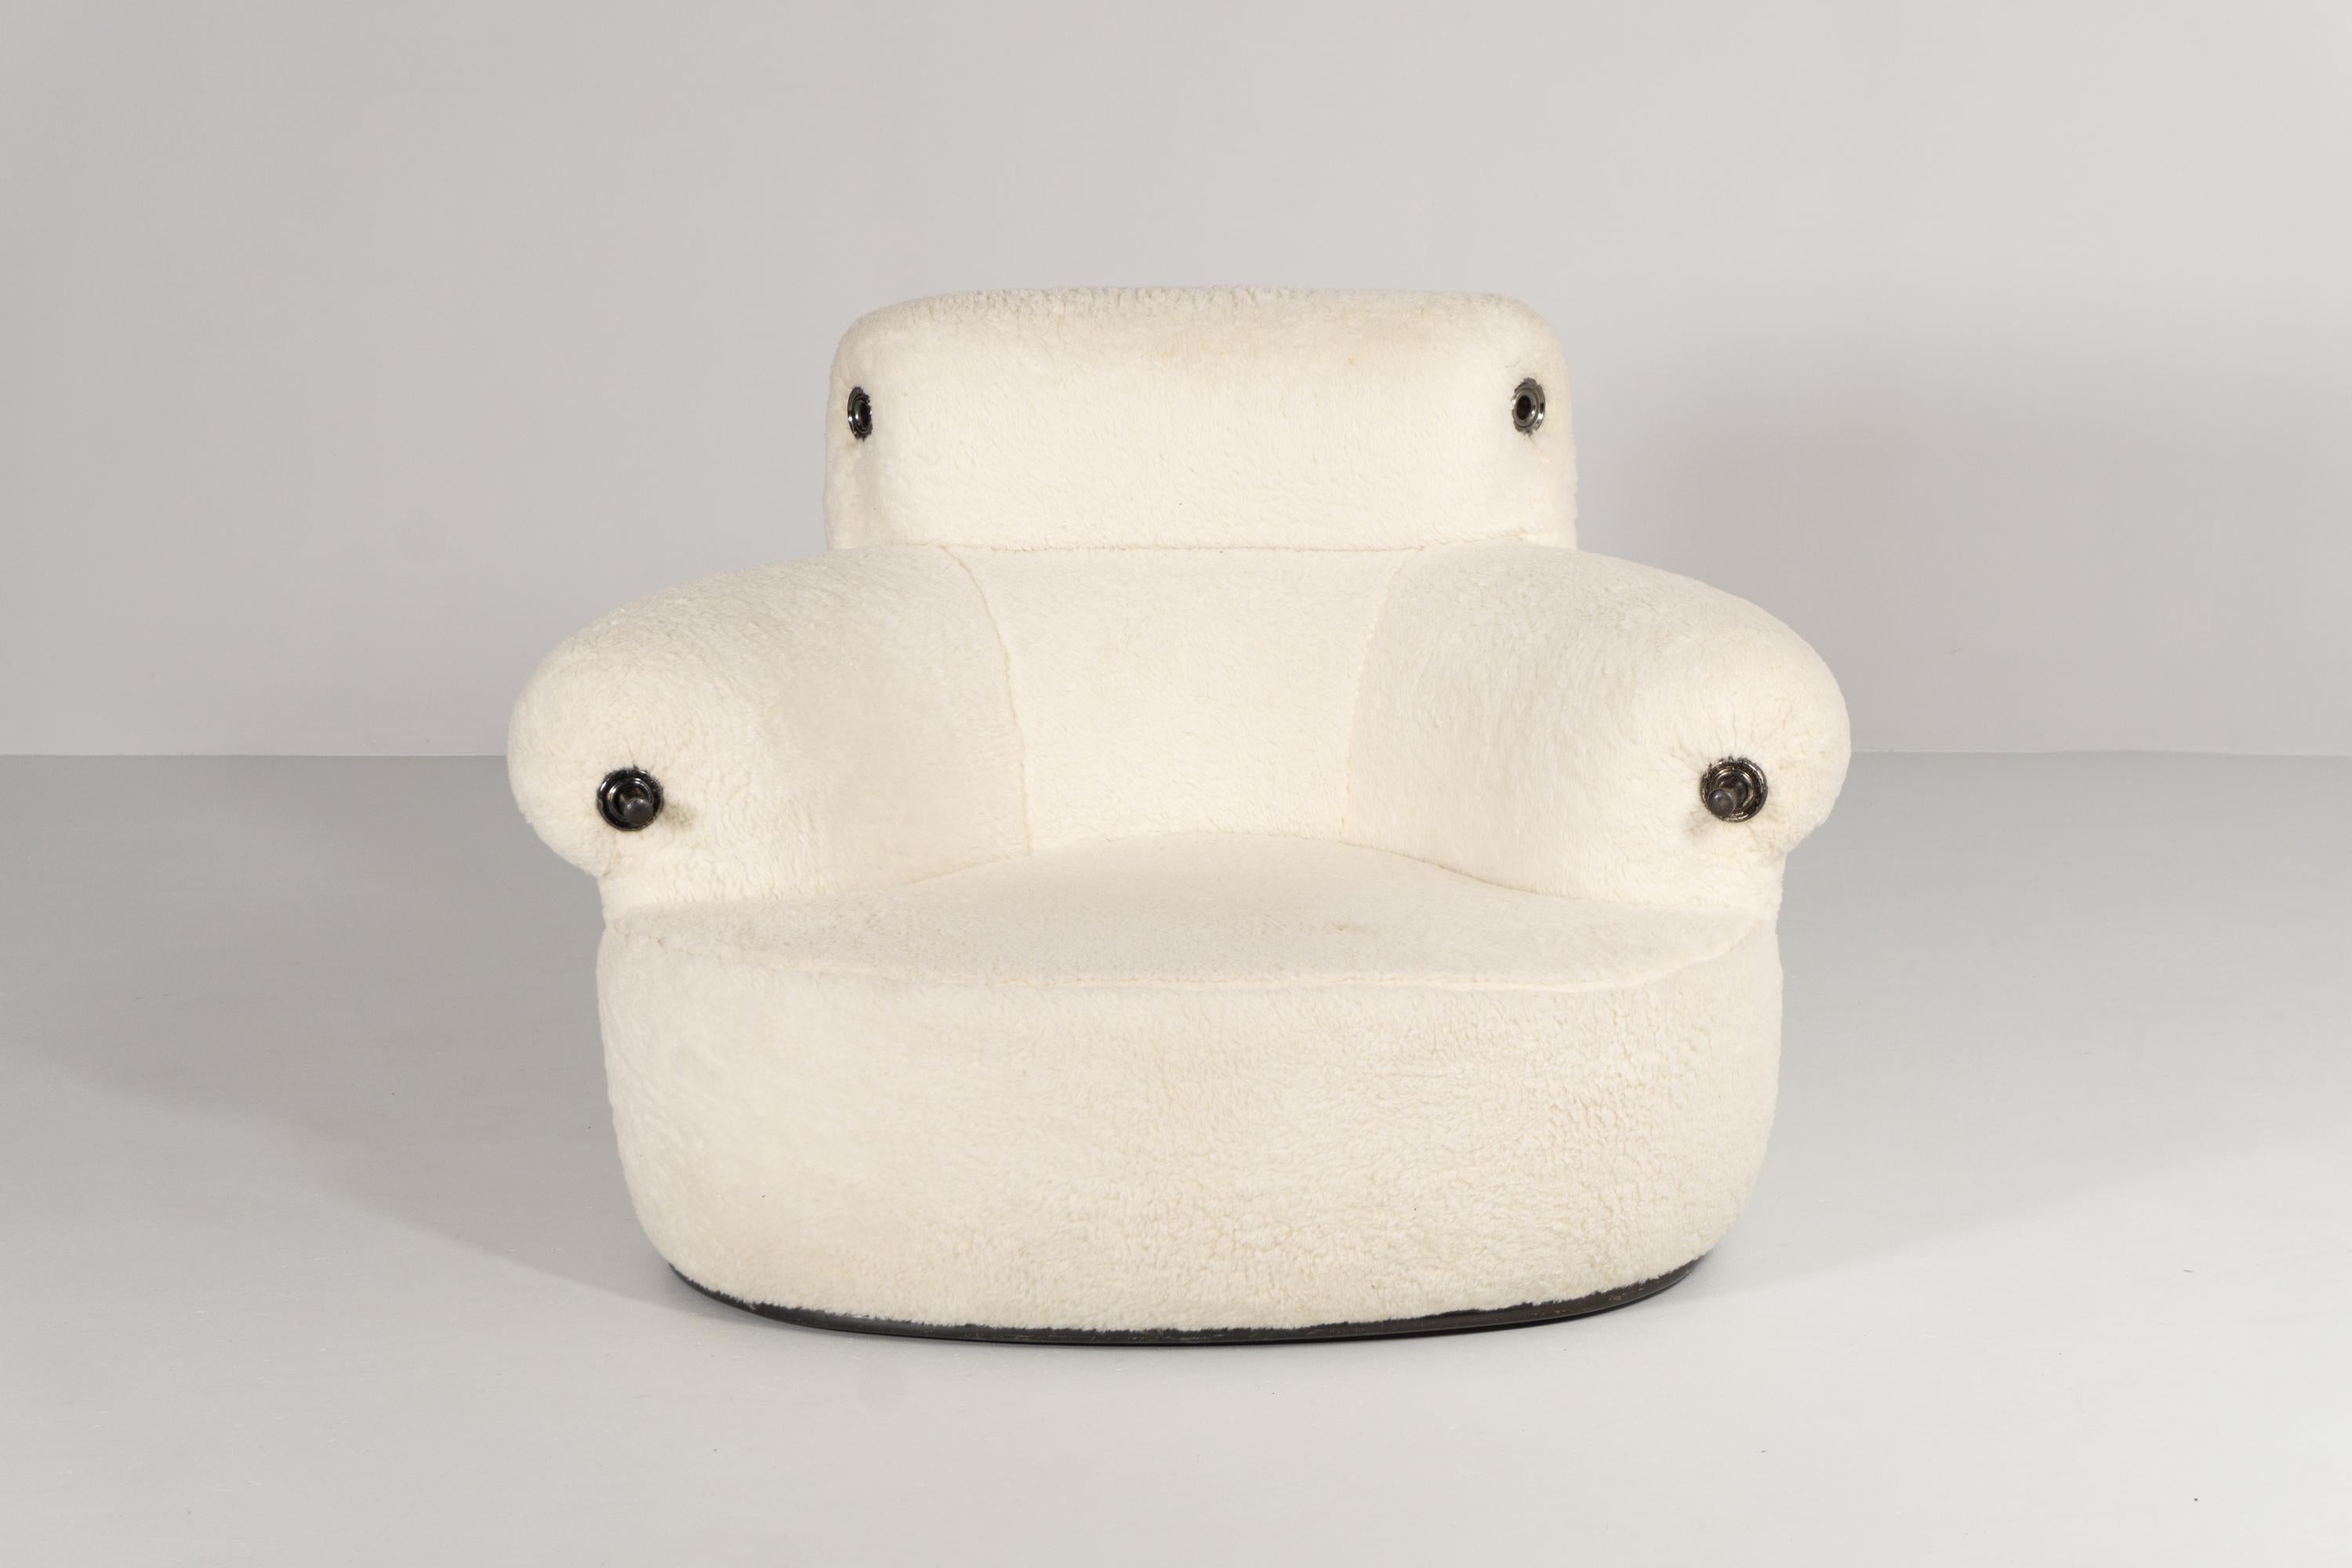 This exceptional, unique armchair made of faux fur was designed by Milanese architect and designer Luigi Caccia Dominioni (1913-2016).
He designed the Armchair Toro in 1973 for Azucena. A tubular steel armchair with molded polyurethane upholstery.